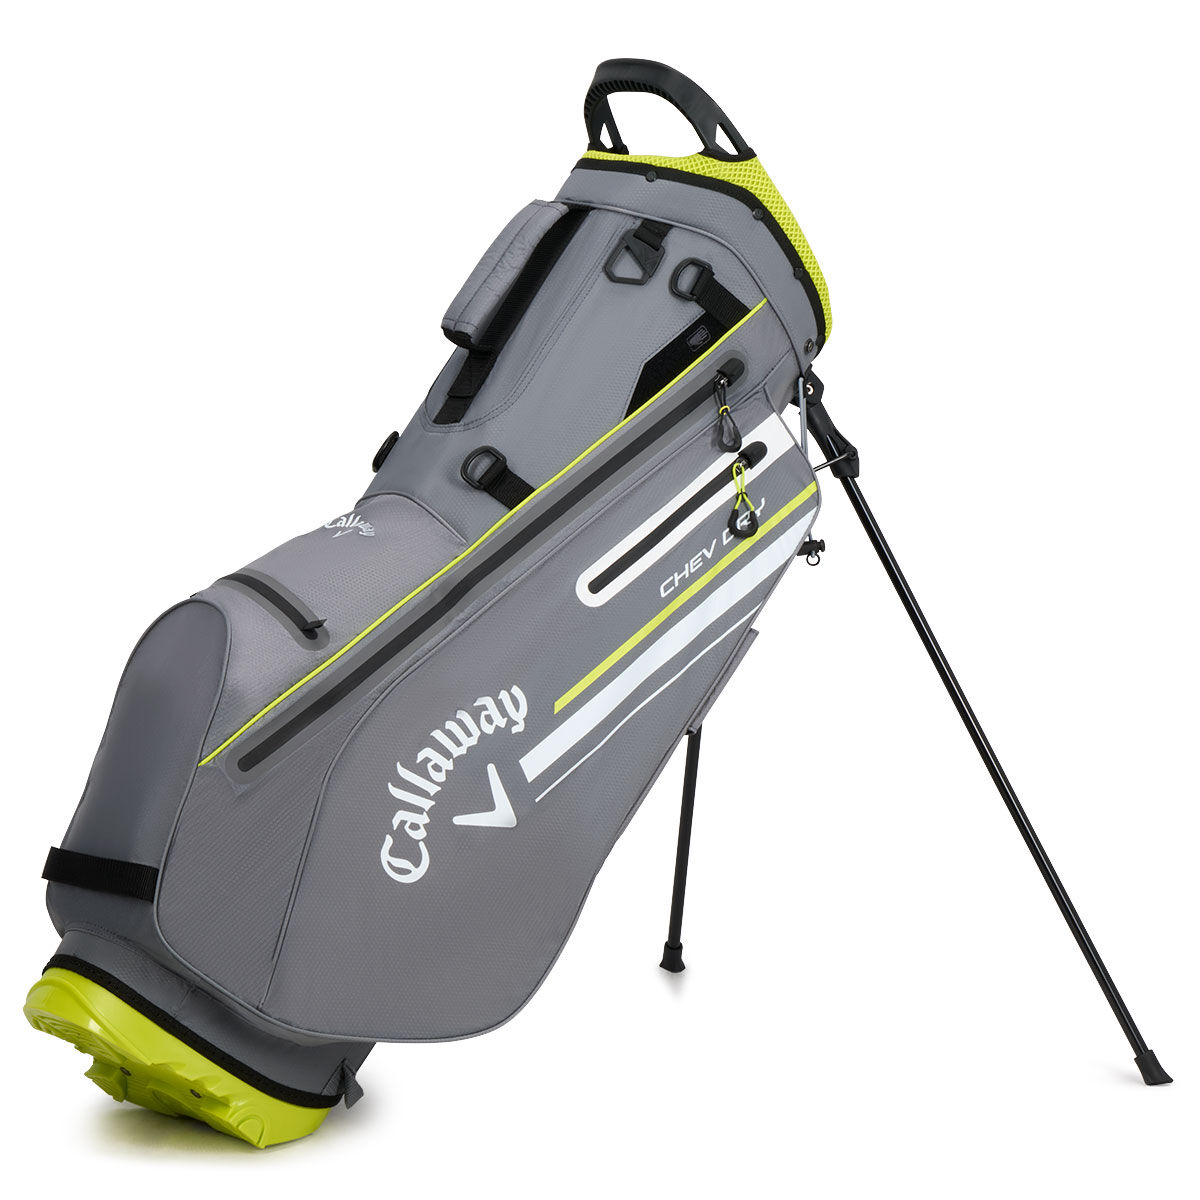 Callaway Chev Dry Golf Stand Bag, Charcoal/flo yellow, One Size | American Golf